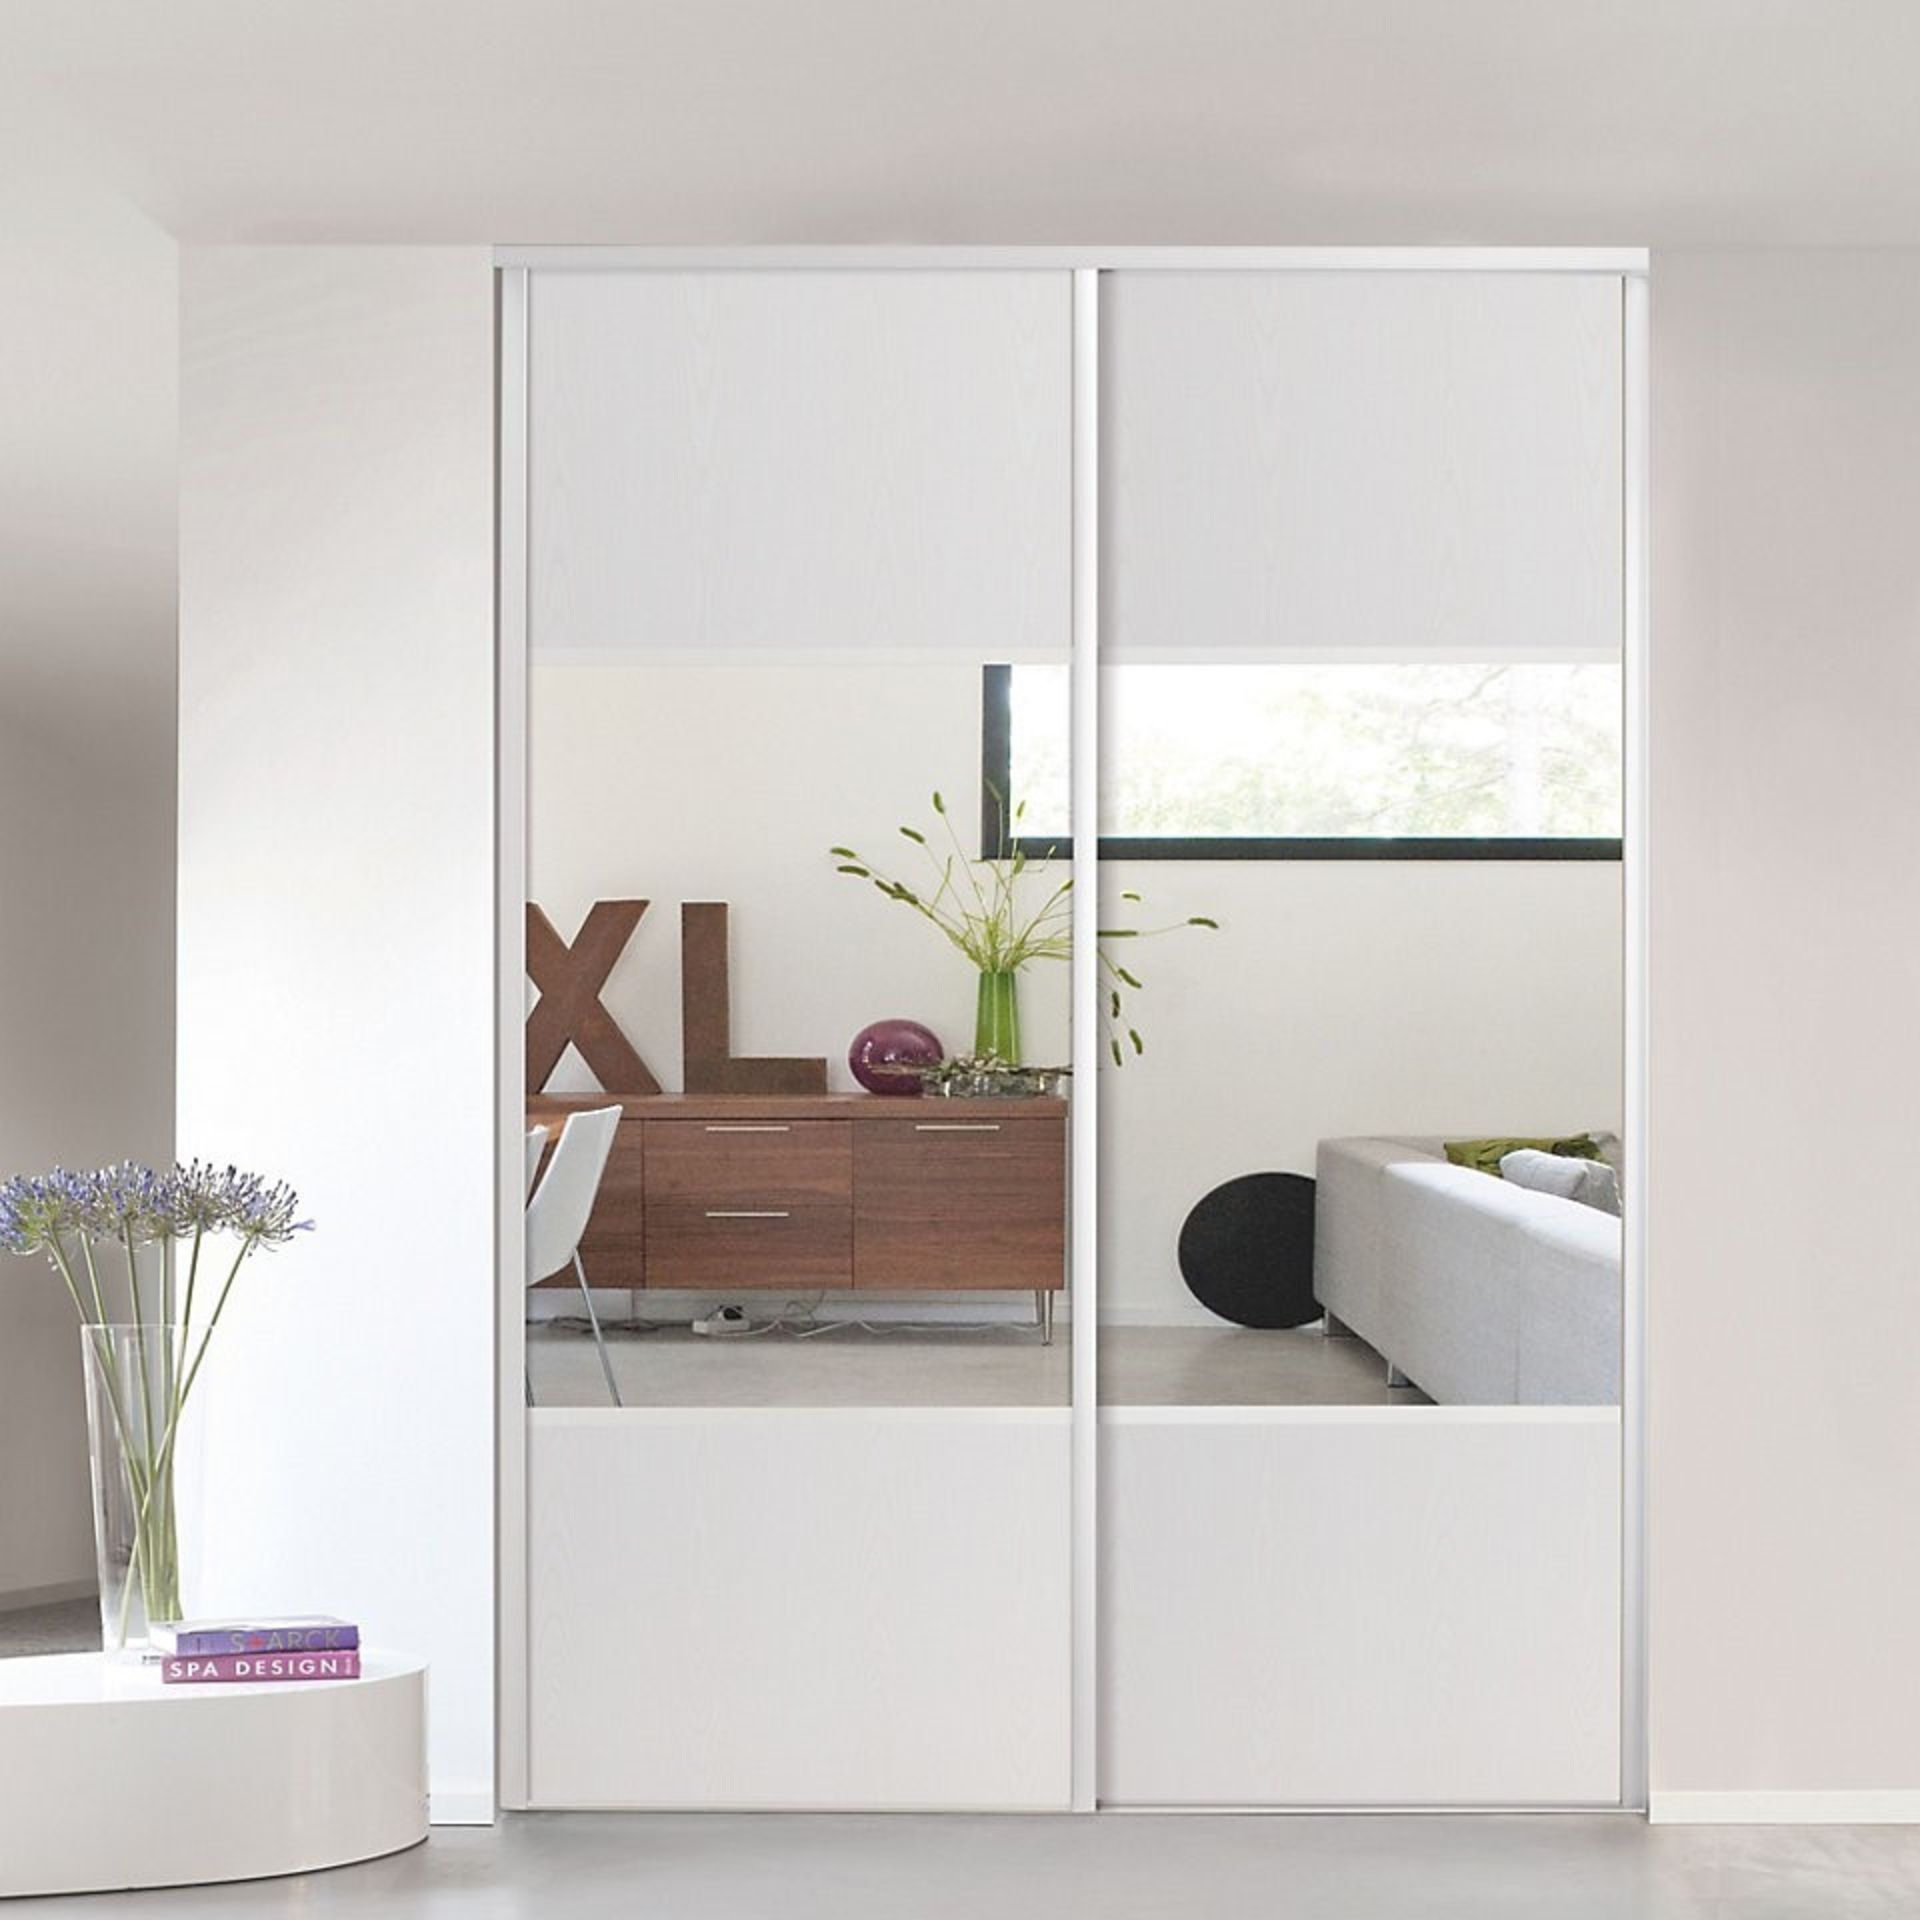 2 x VALLA 1 Sliding Wardrobe Door With A Silver Mirror With Profiles In White Lacquered Steel - CL37